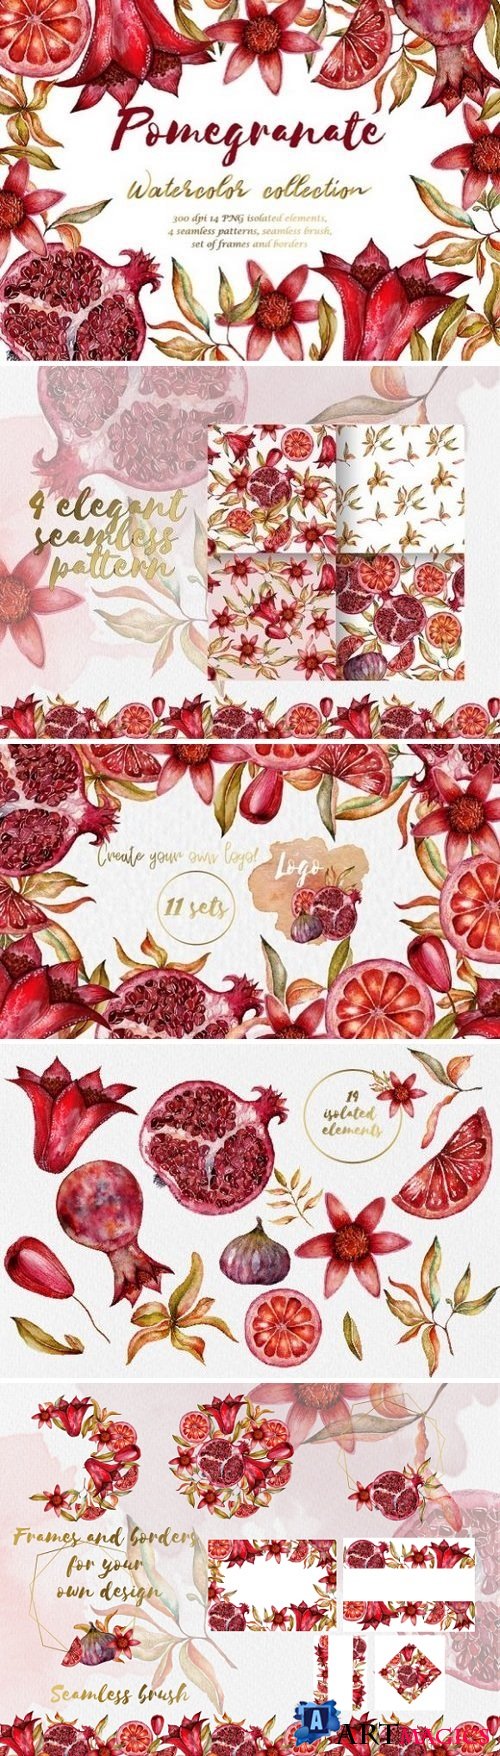 Floral collection of pomegranate